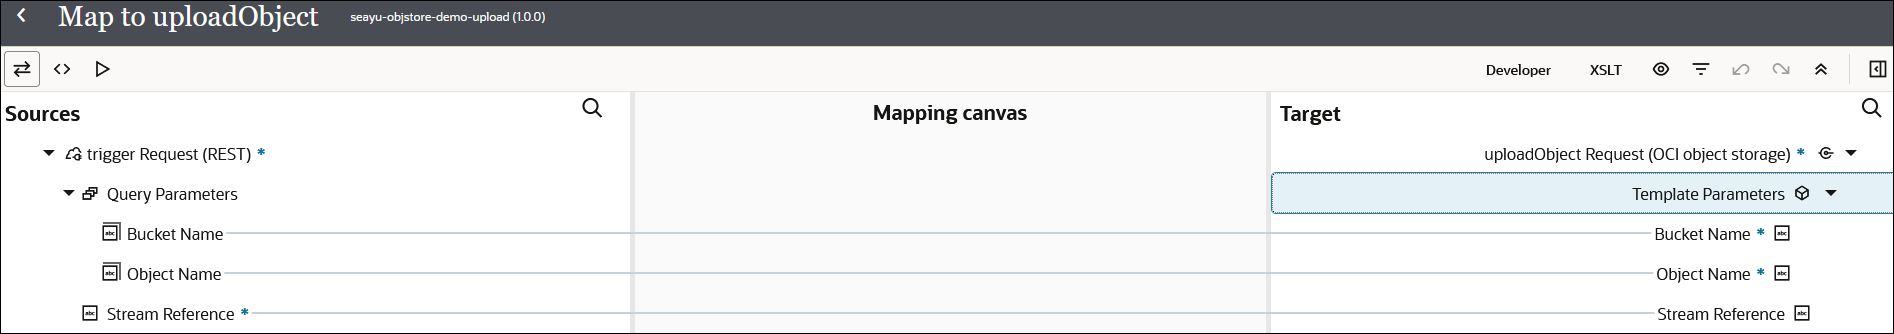 The Sources, Mapping canvas, and Targets sections are shown. Bucket Name is mapped to Bucket Name. Object Name is mapped to Object Name. Stream Reference is mapped to Stream Reference.